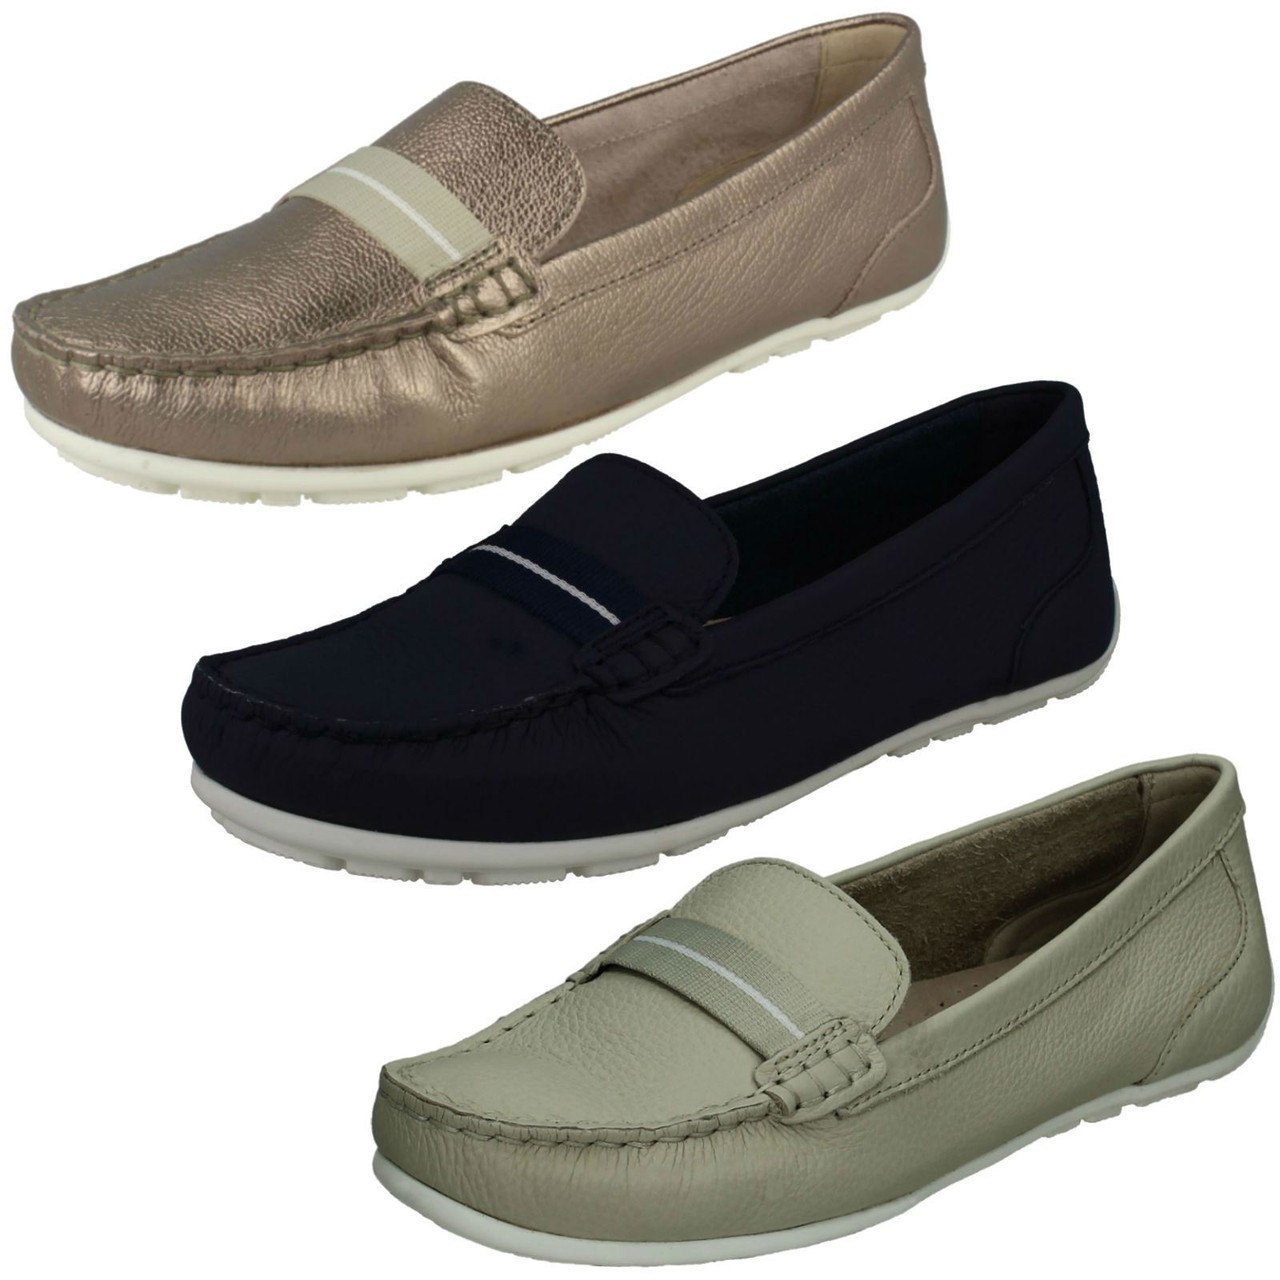 Duchess Norm Ingeniører Ladies Clarks Casual Loafers Dameo Vine